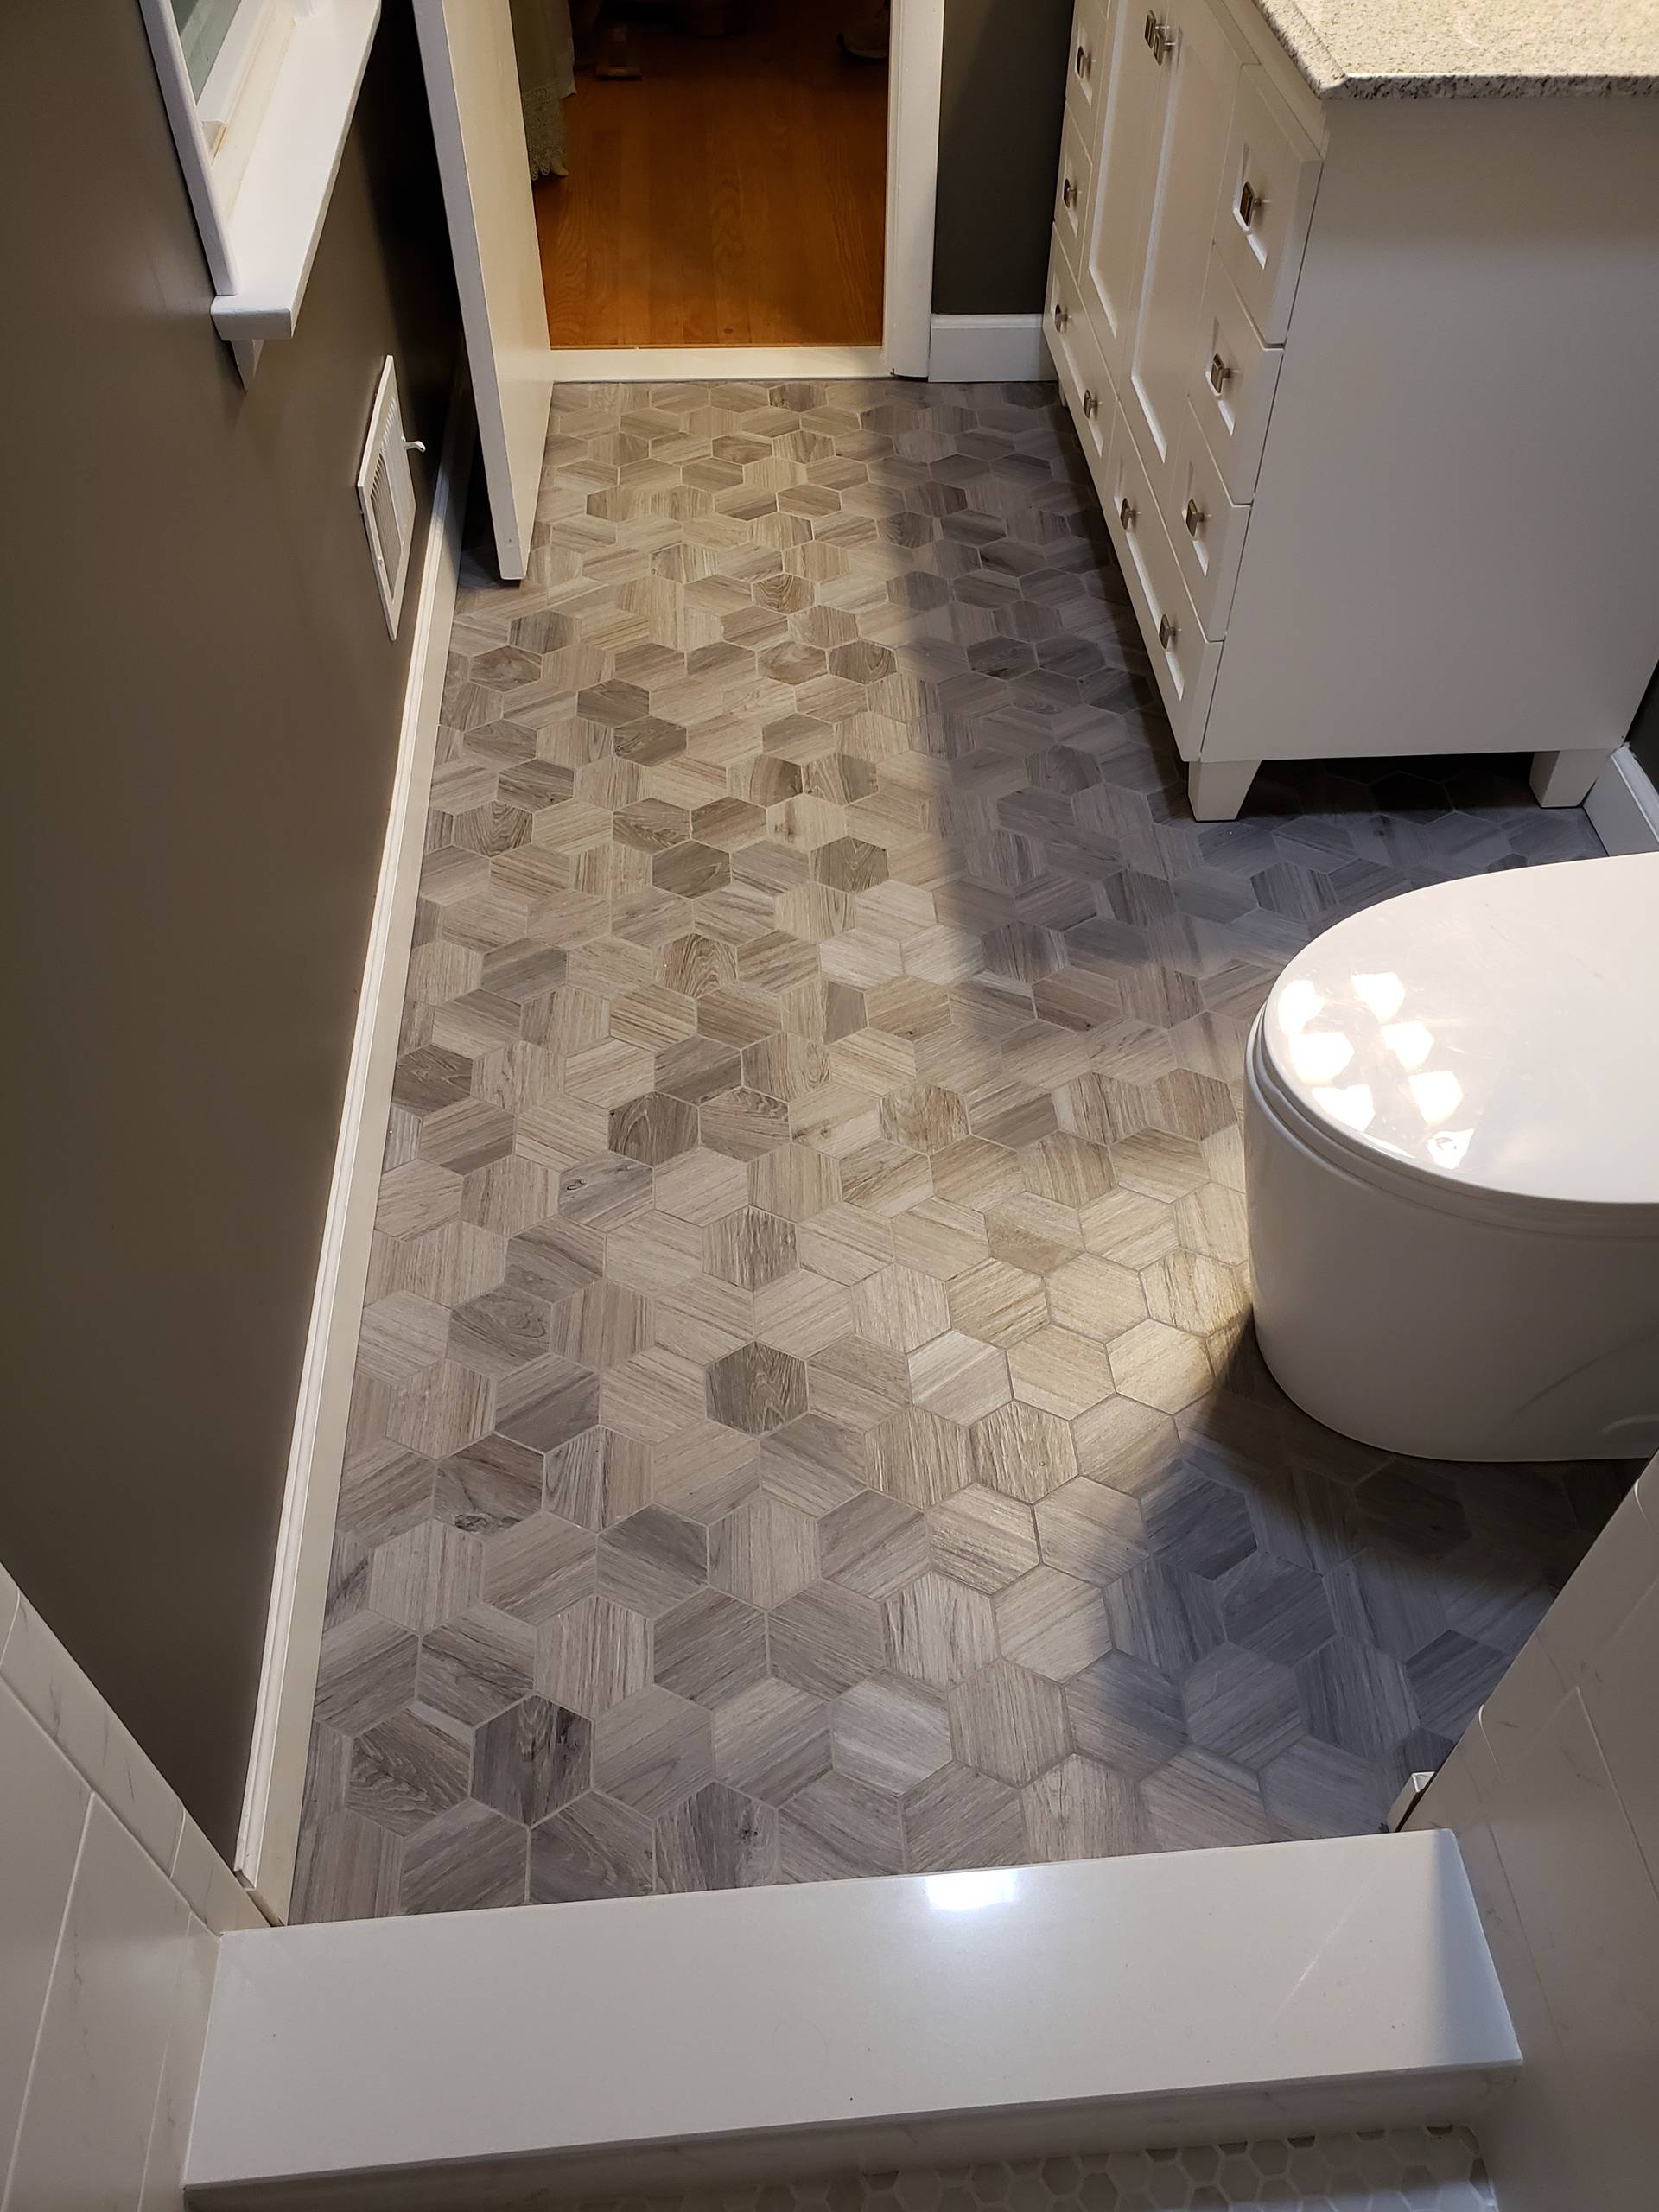 Complete Bathroom Makeover & Flooring- What a Difference!